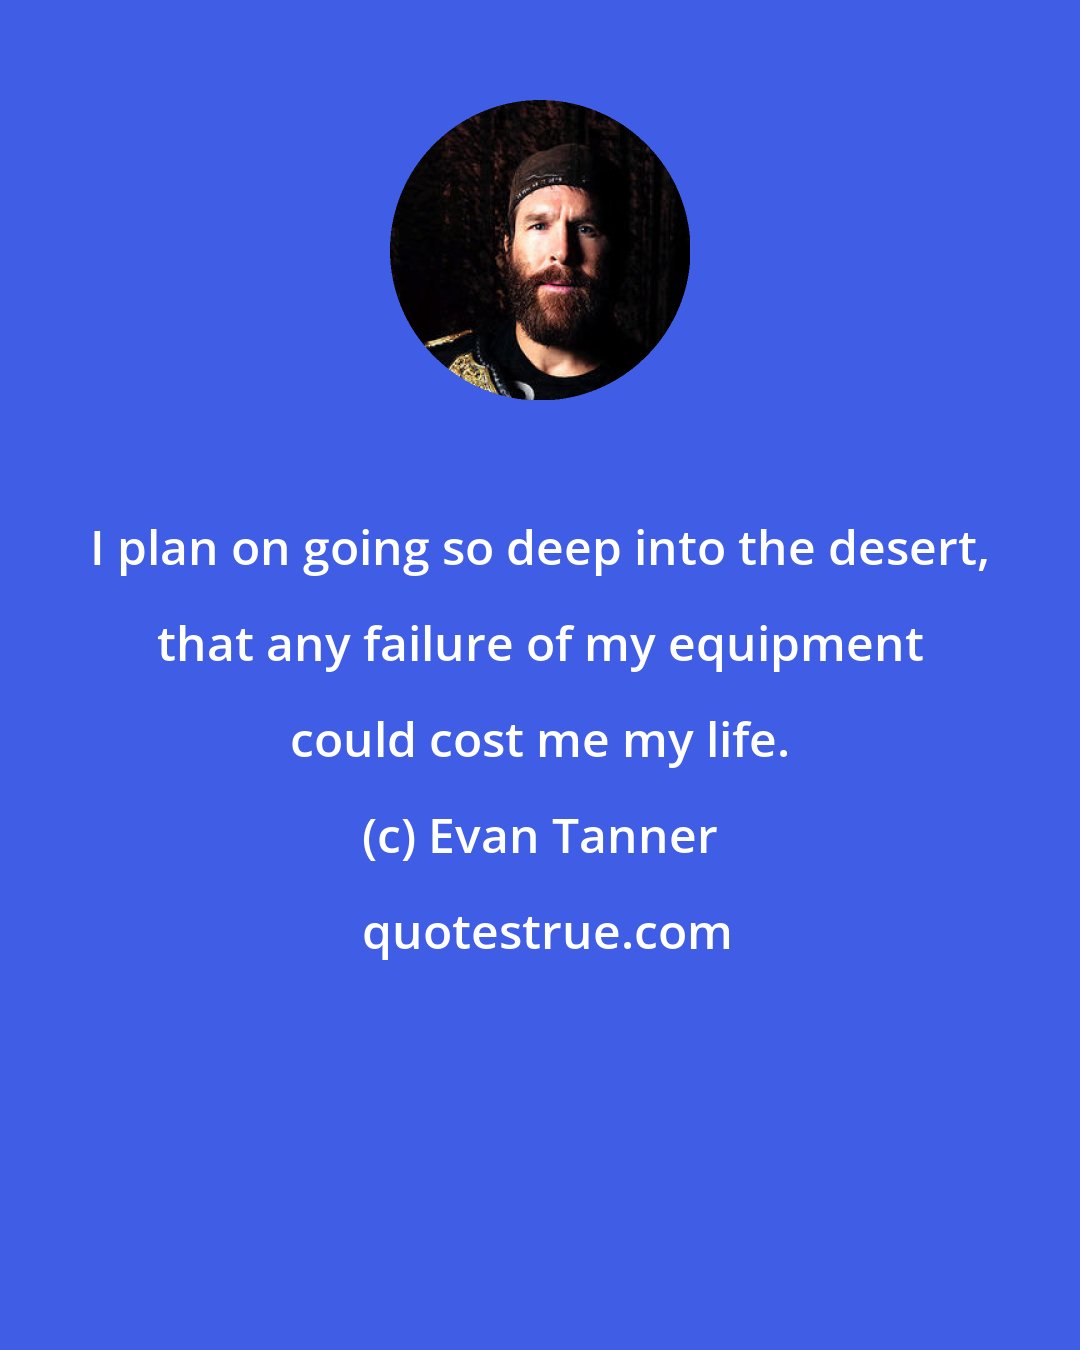 Evan Tanner: I plan on going so deep into the desert, that any failure of my equipment could cost me my life.